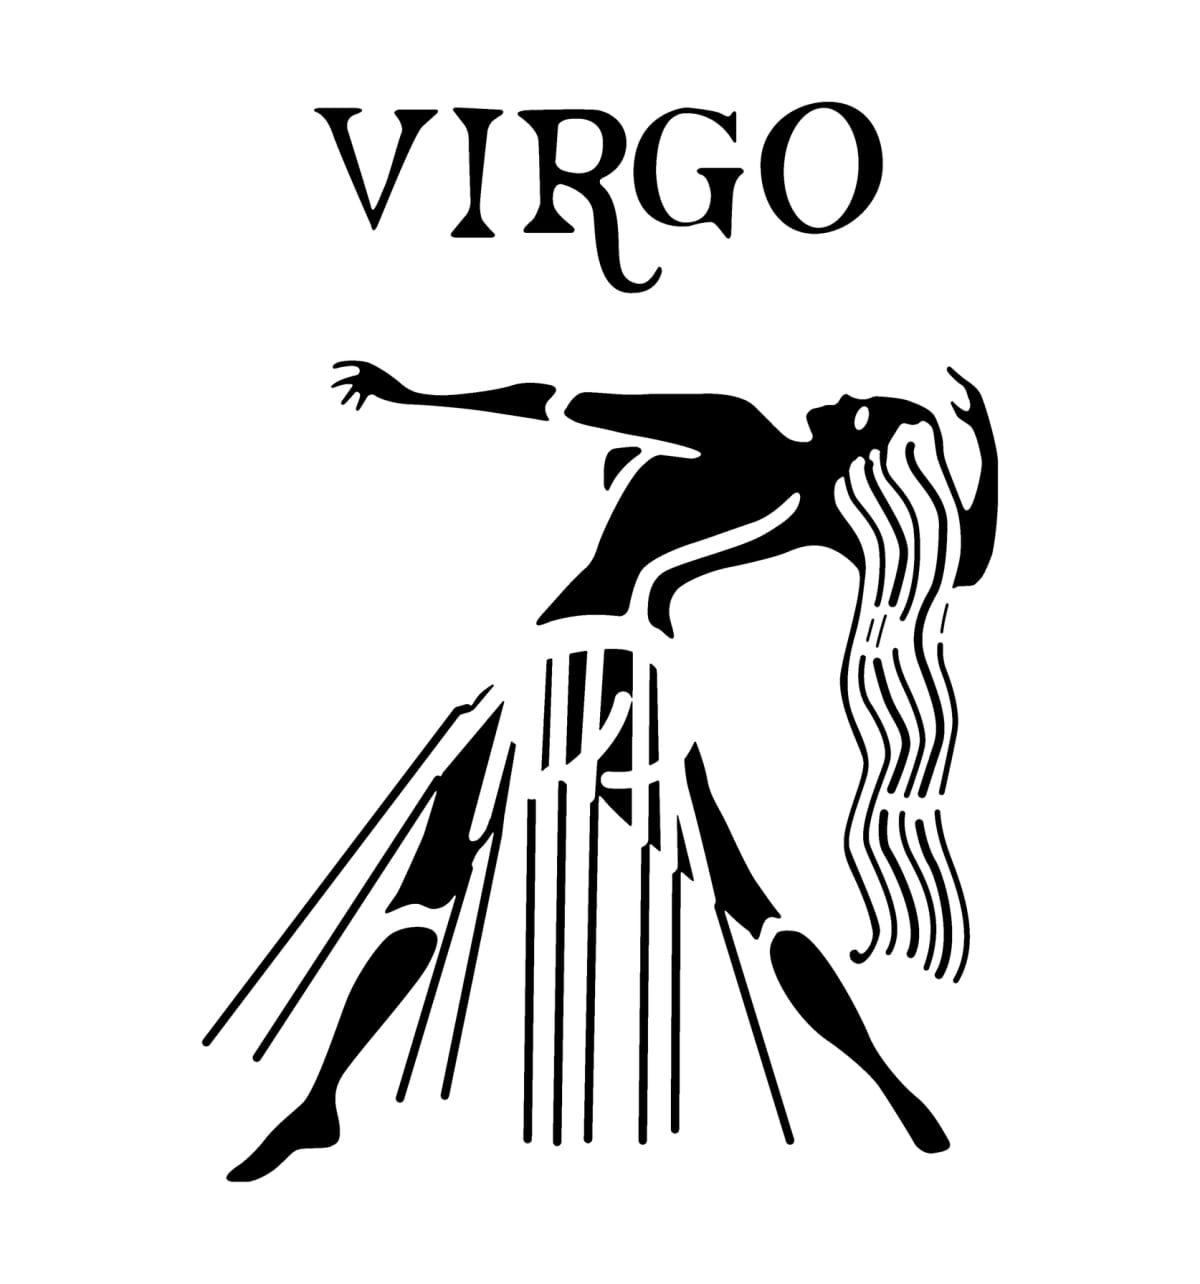 Virgo and the image of a woman leaning backwards